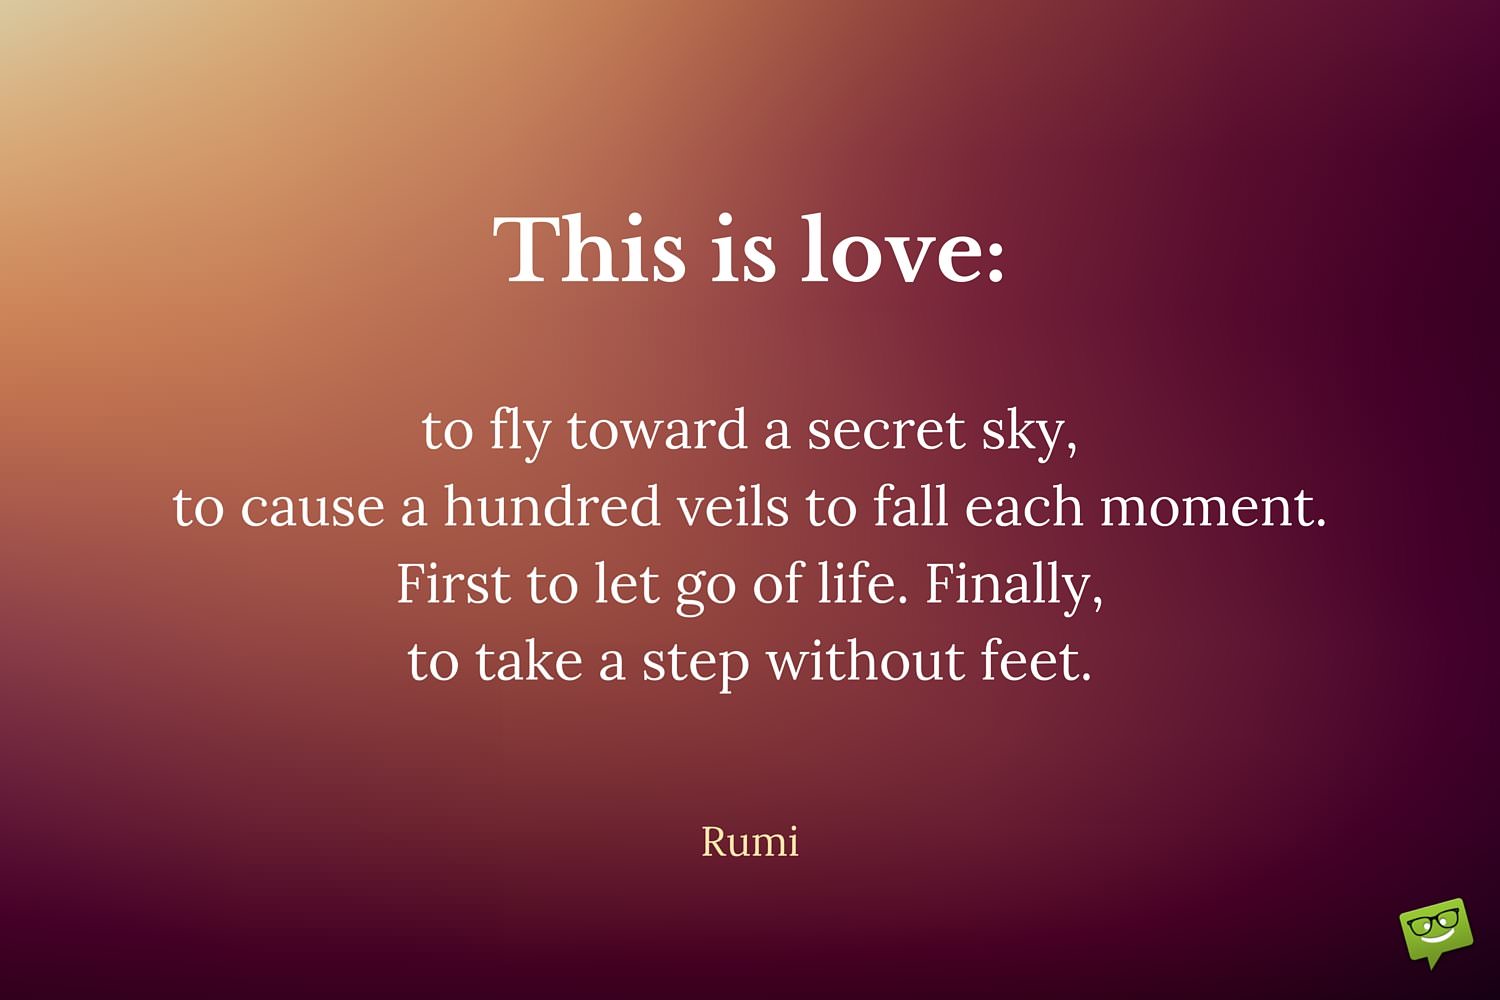 This is love to fly toward a secret sky to cause a hundred veils to fall each moment First to let go of life Finally to take a step without feet Rumi